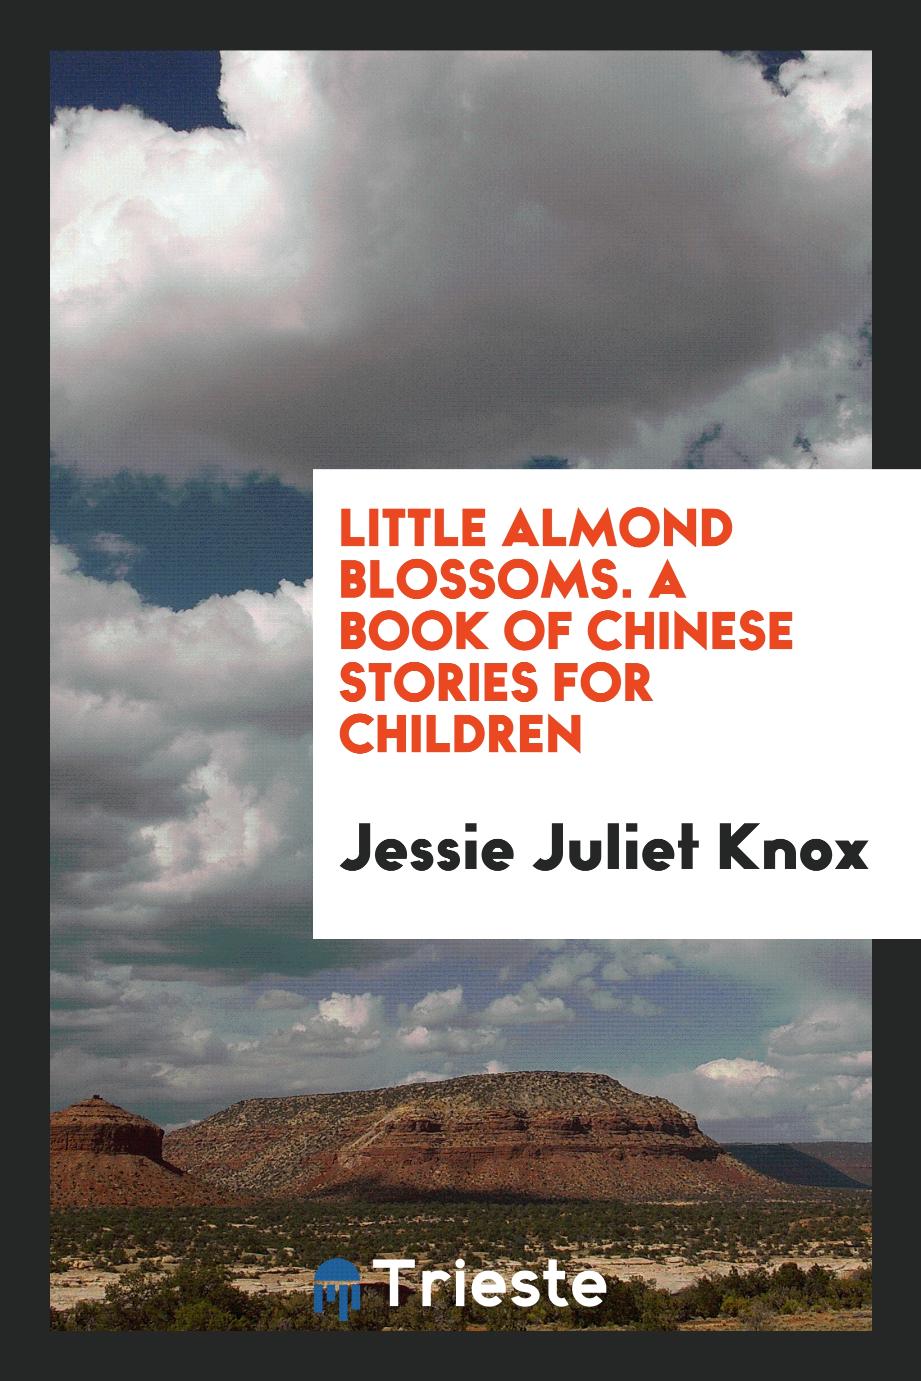 Little almond blossoms. A book of Chinese stories for children